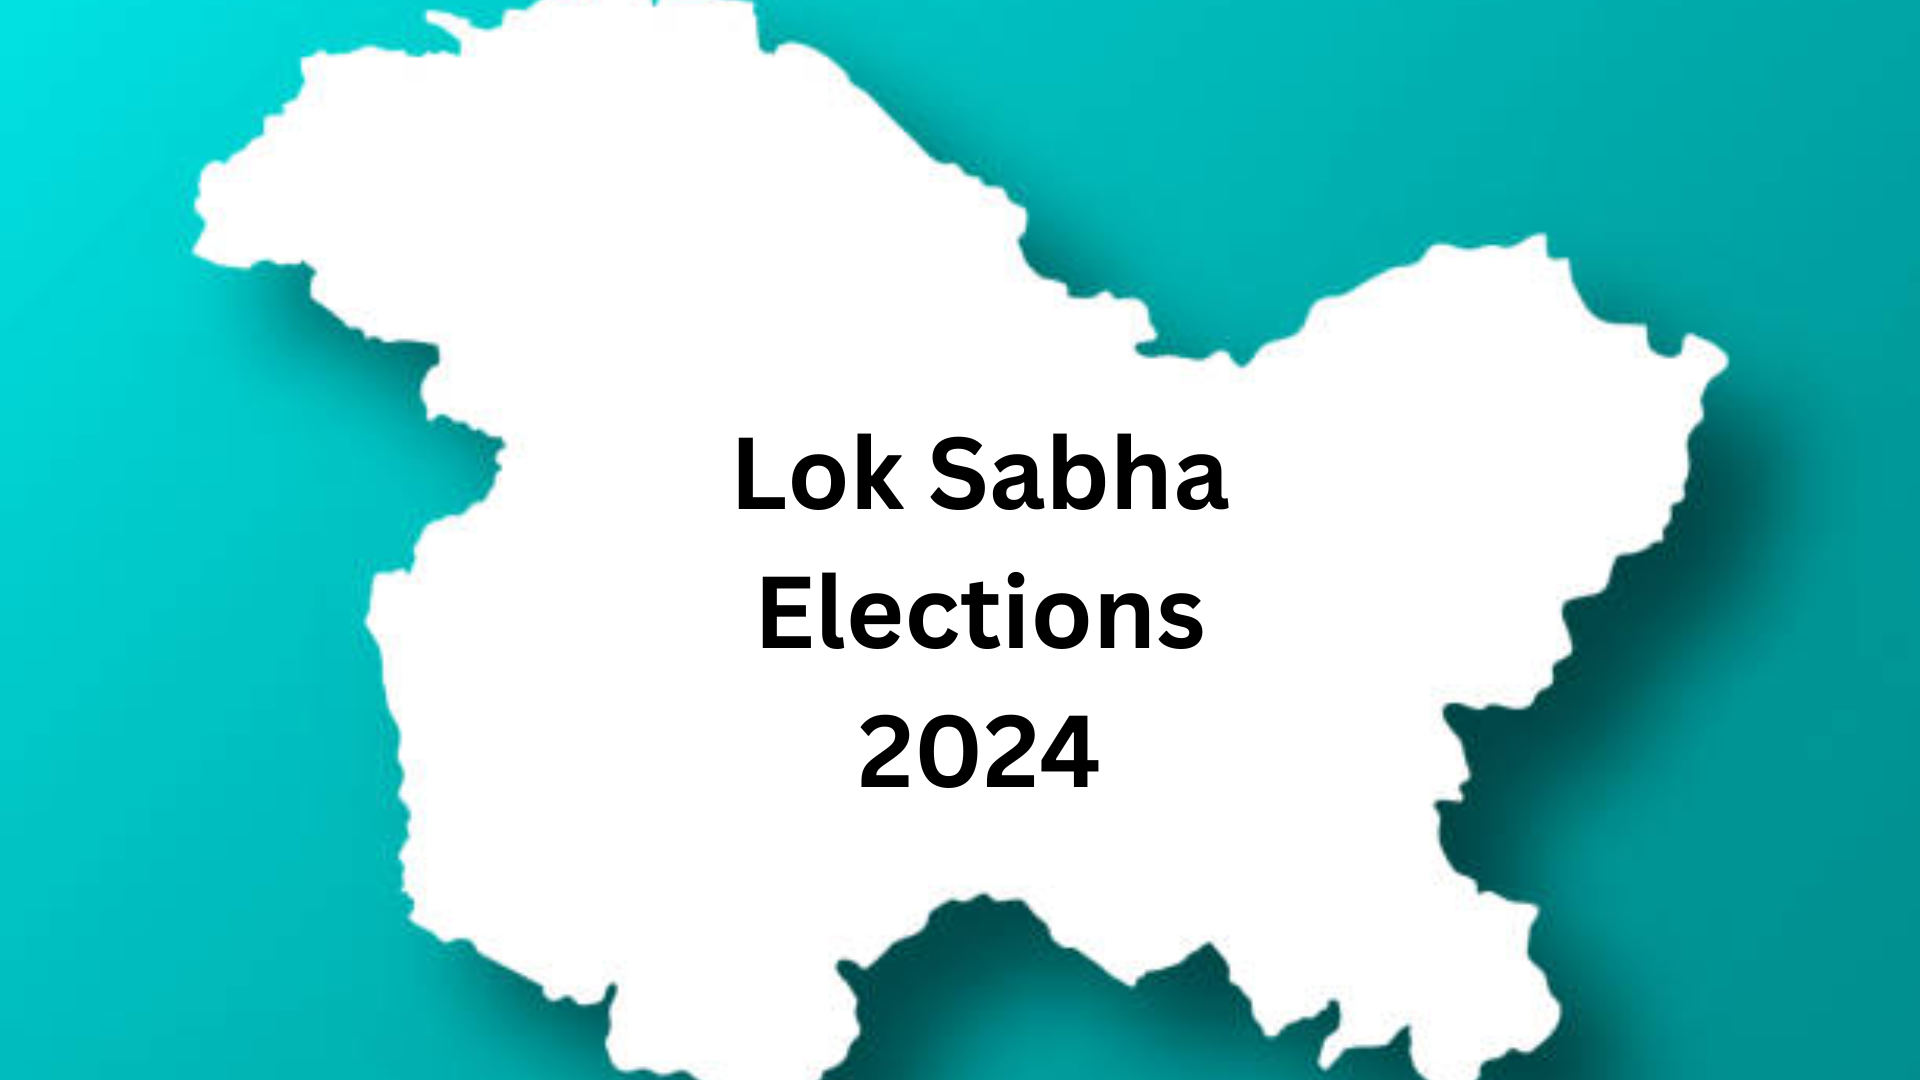 Lok Sabha Elections 2024: Decision On Anantnag Election In J&K Awaited From Poll Authorities